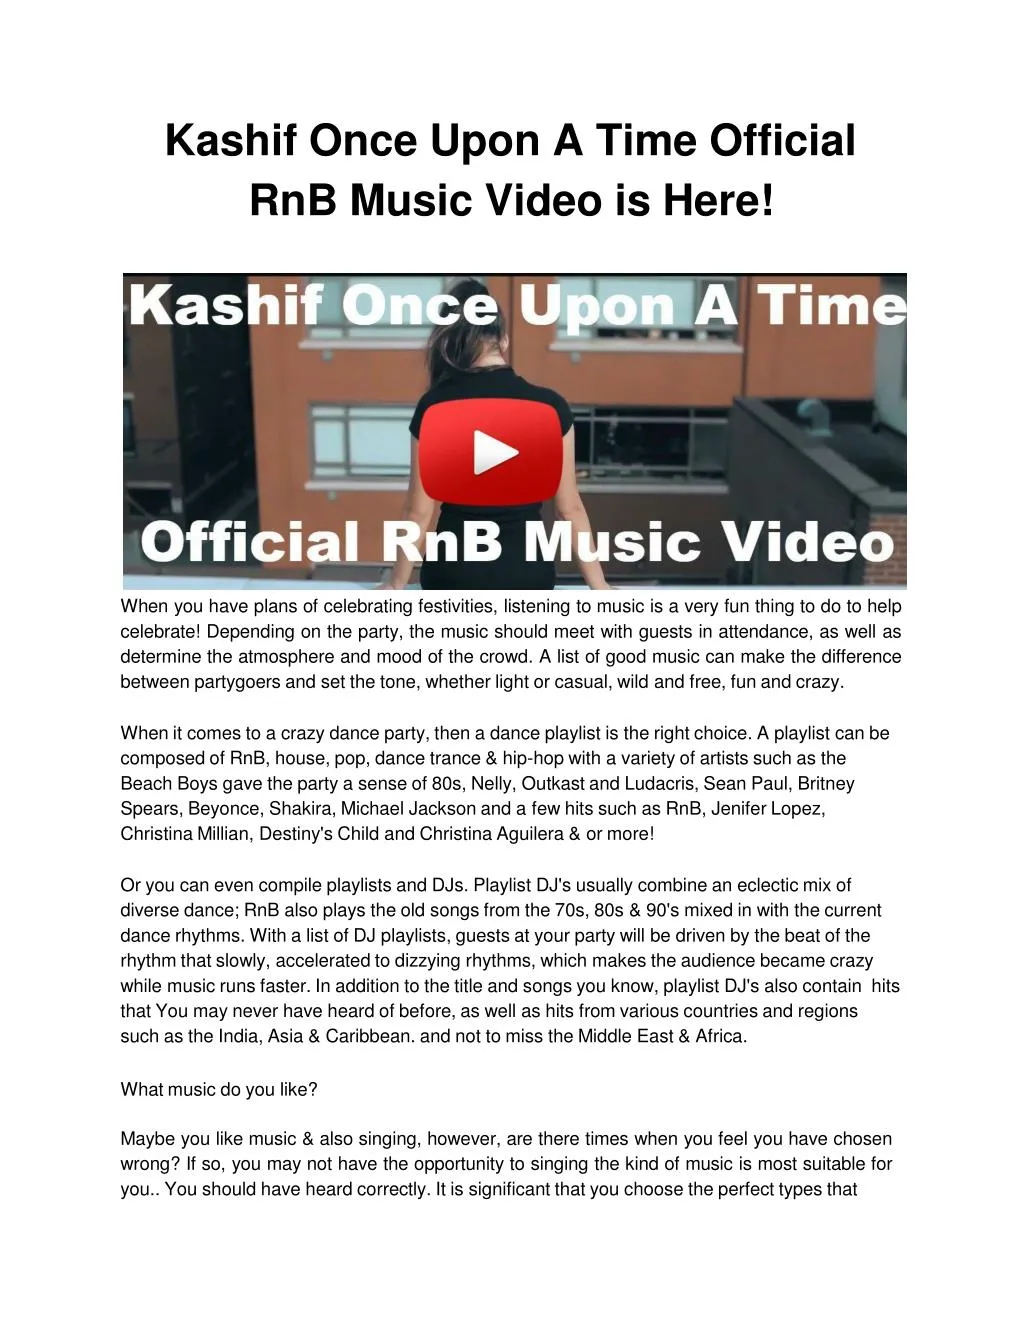 kashif once upon a time official rnb music video is here